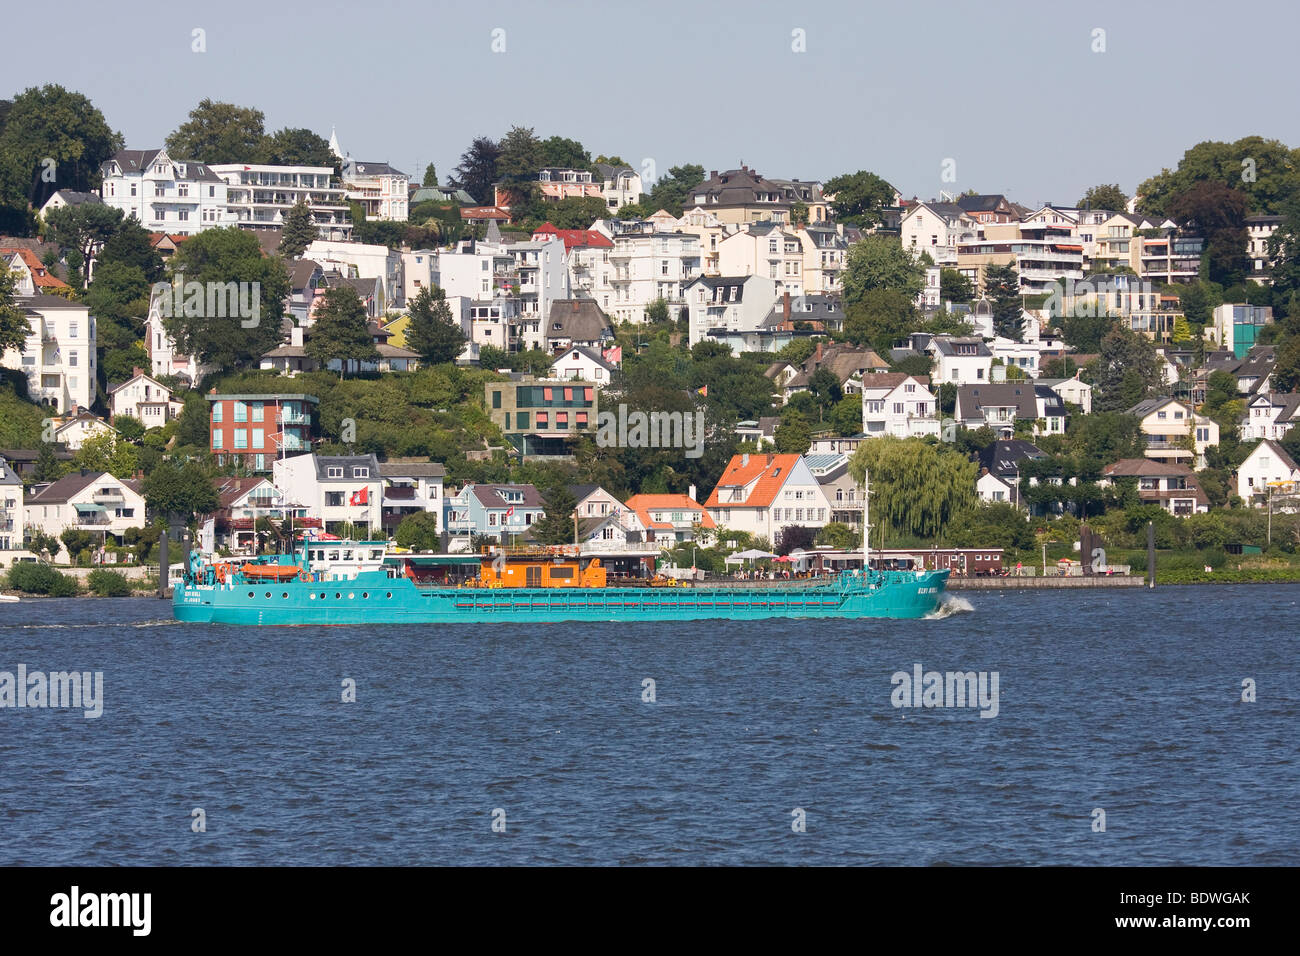 View on the Suellberg hill overlooking the river Elbe in the suburb of Blankenese in Hamburg, Germany, Europe Stock Photo